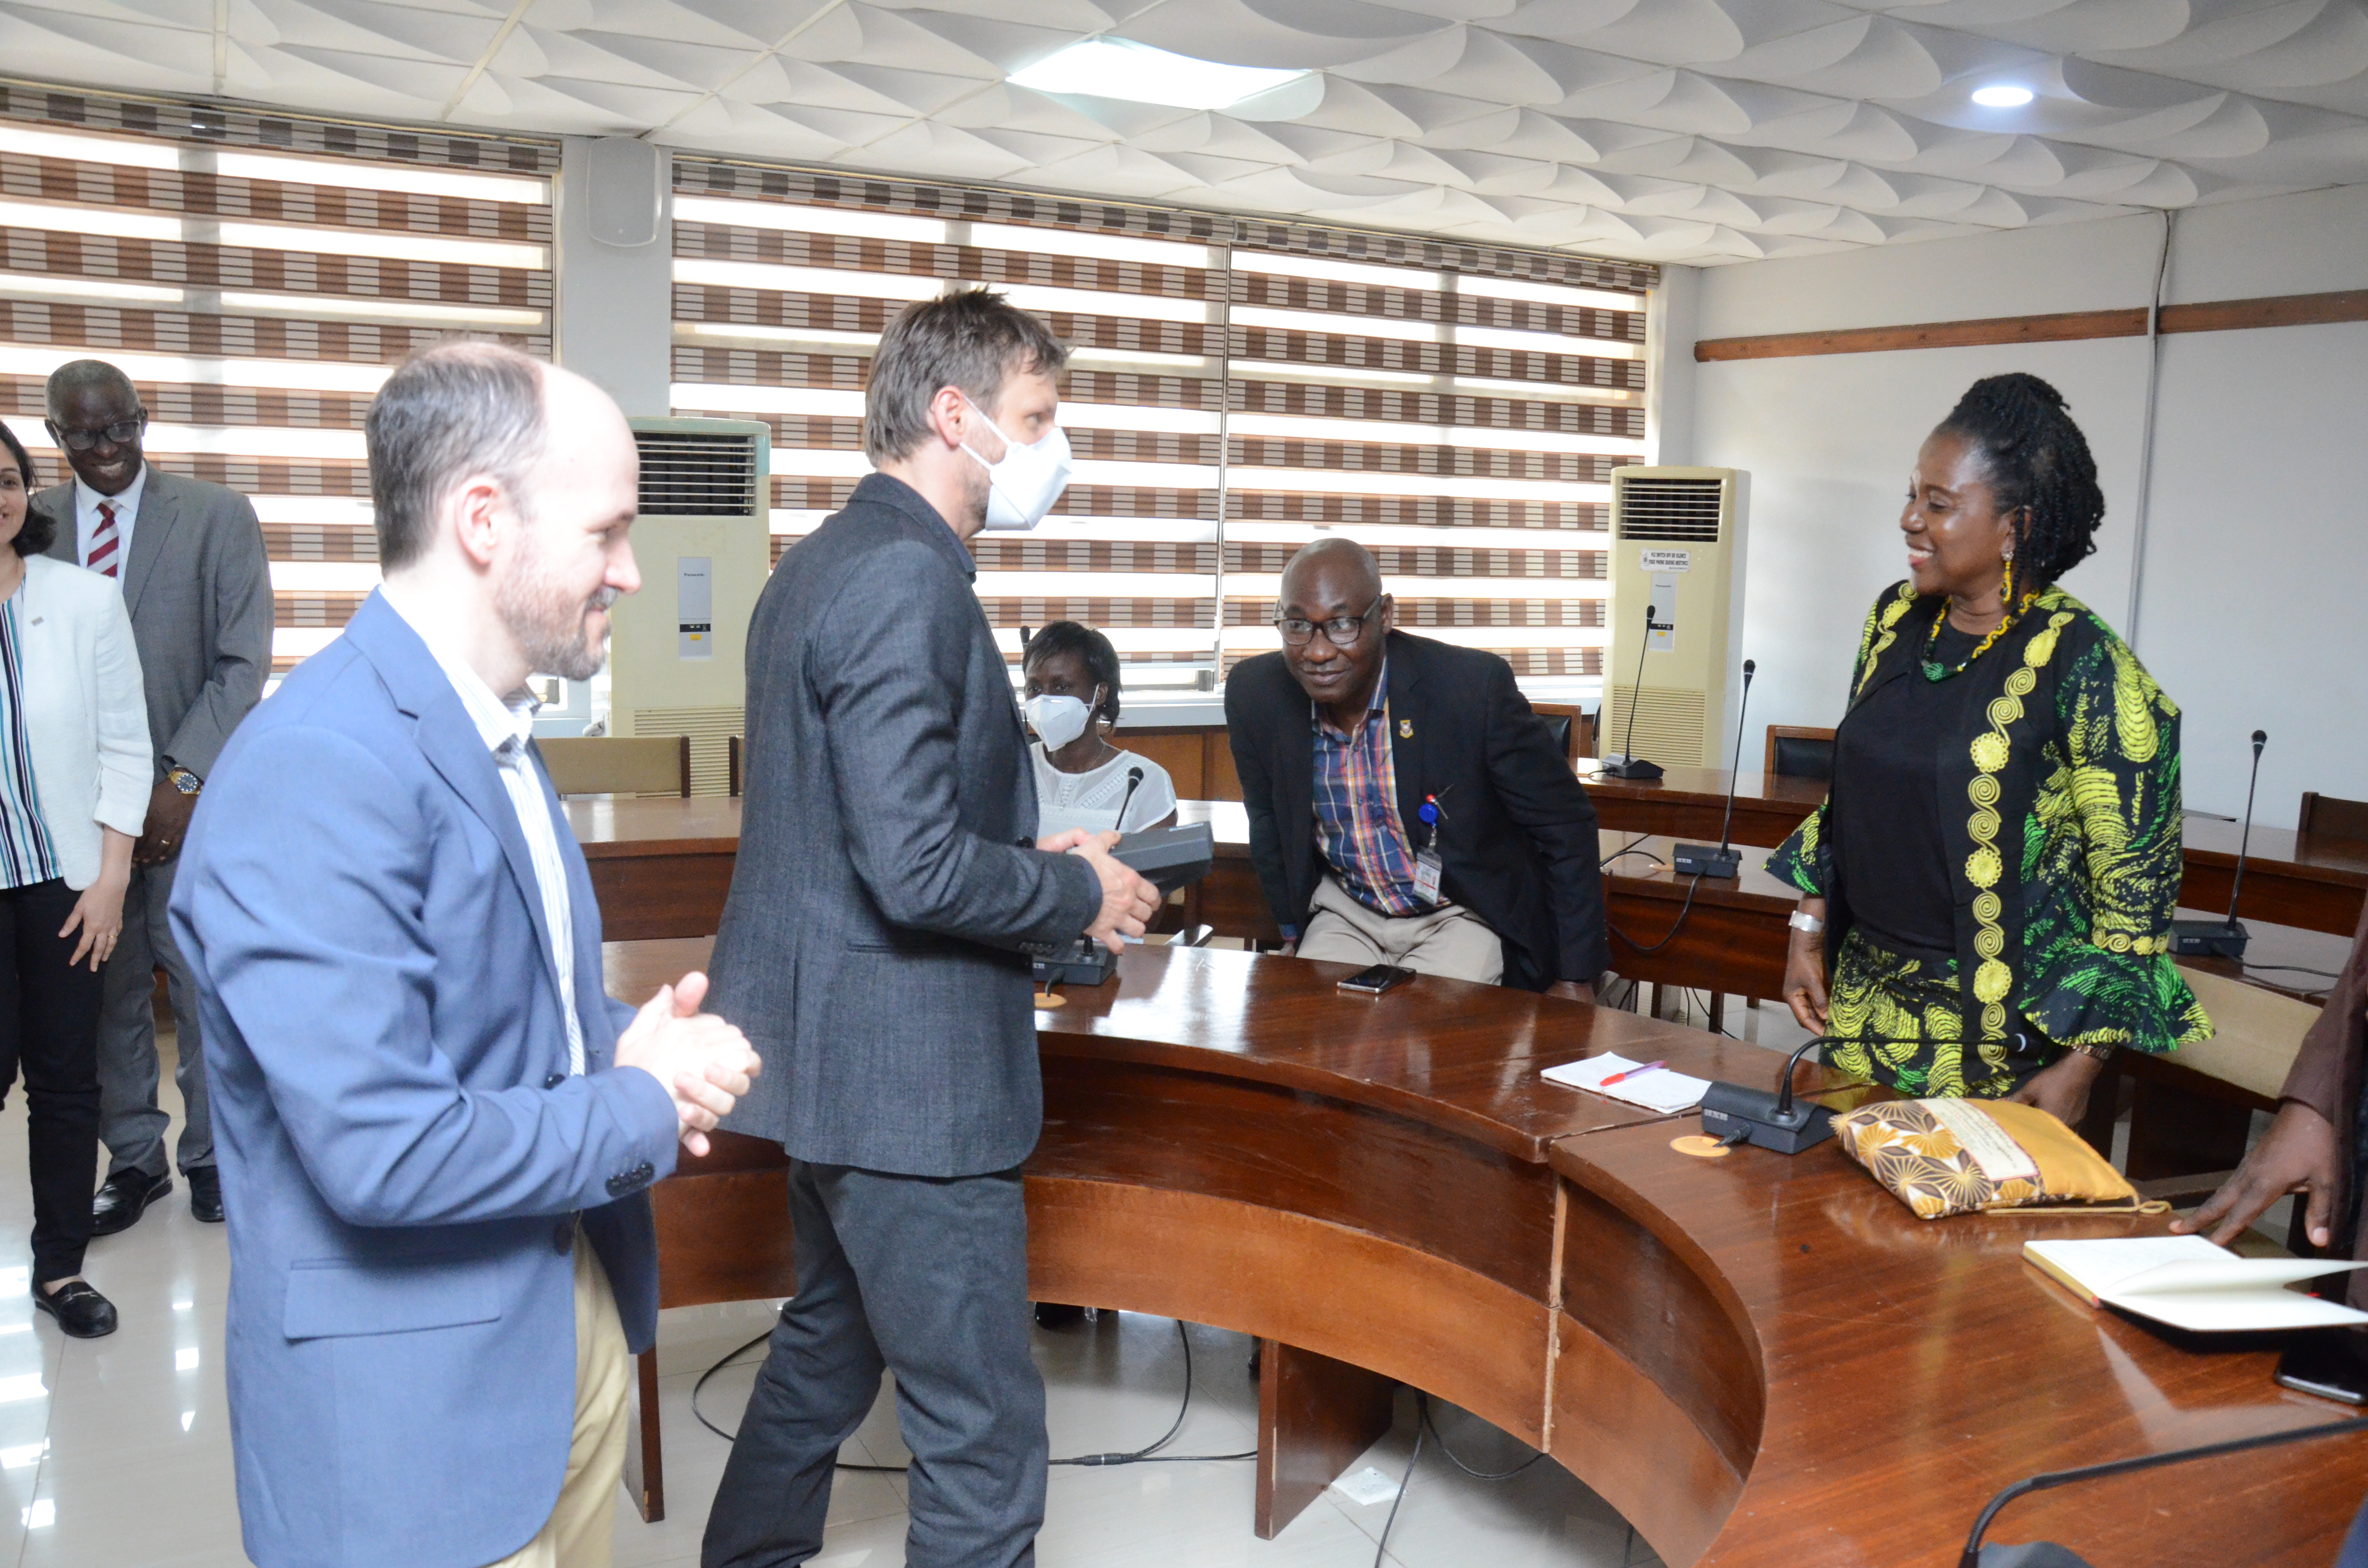 ARTIFICIAL INTELLIGENCE RESEARCH PROJECT TEAM PAYS COURTESY VISIT TO THE PROVOST, COLLEGE OF MEDICINE